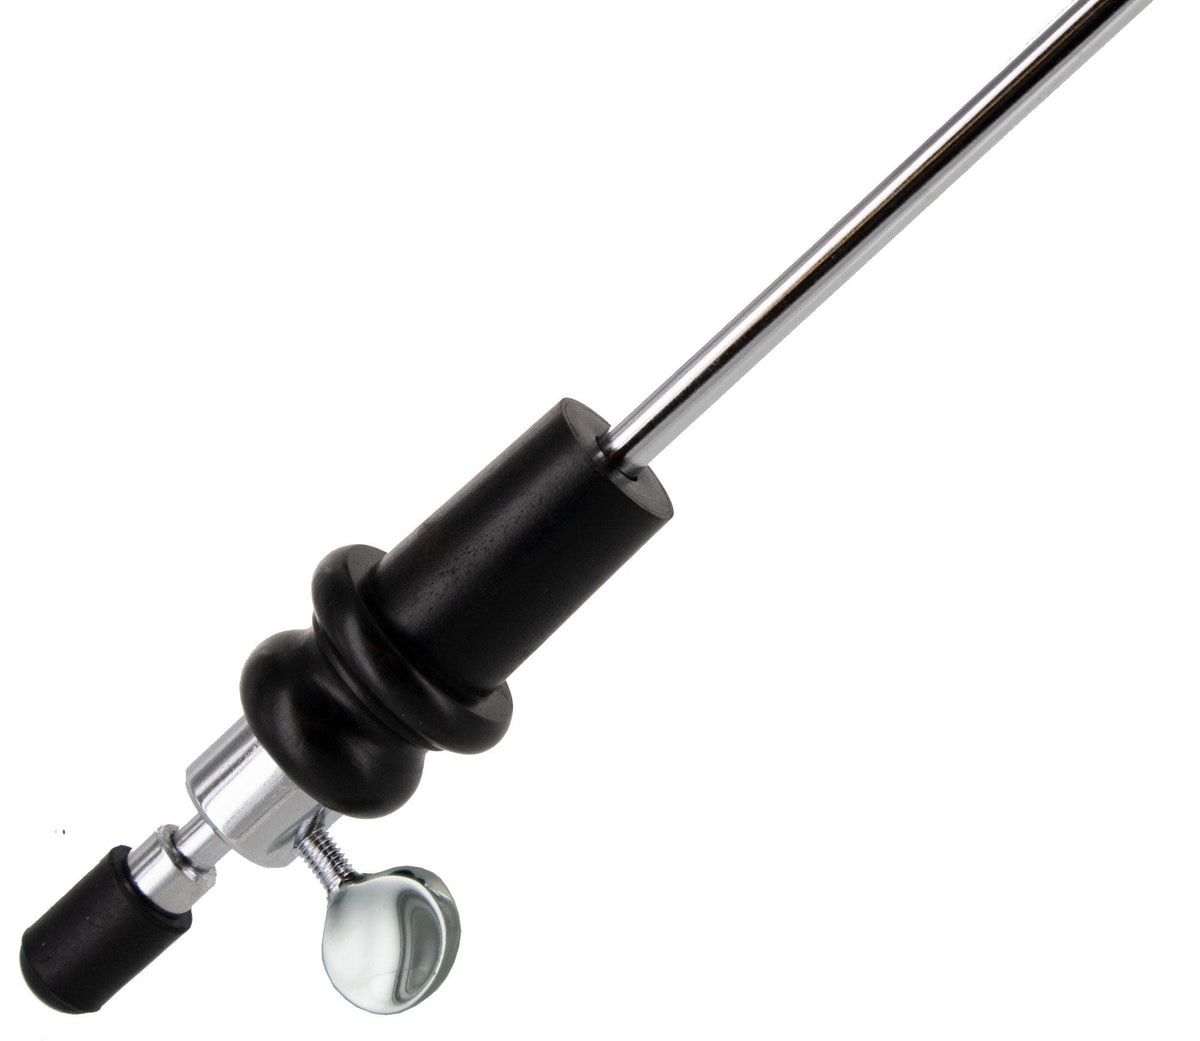 Cello Endpin with Ebony Plug – 20” long, 8mm diameter shaft